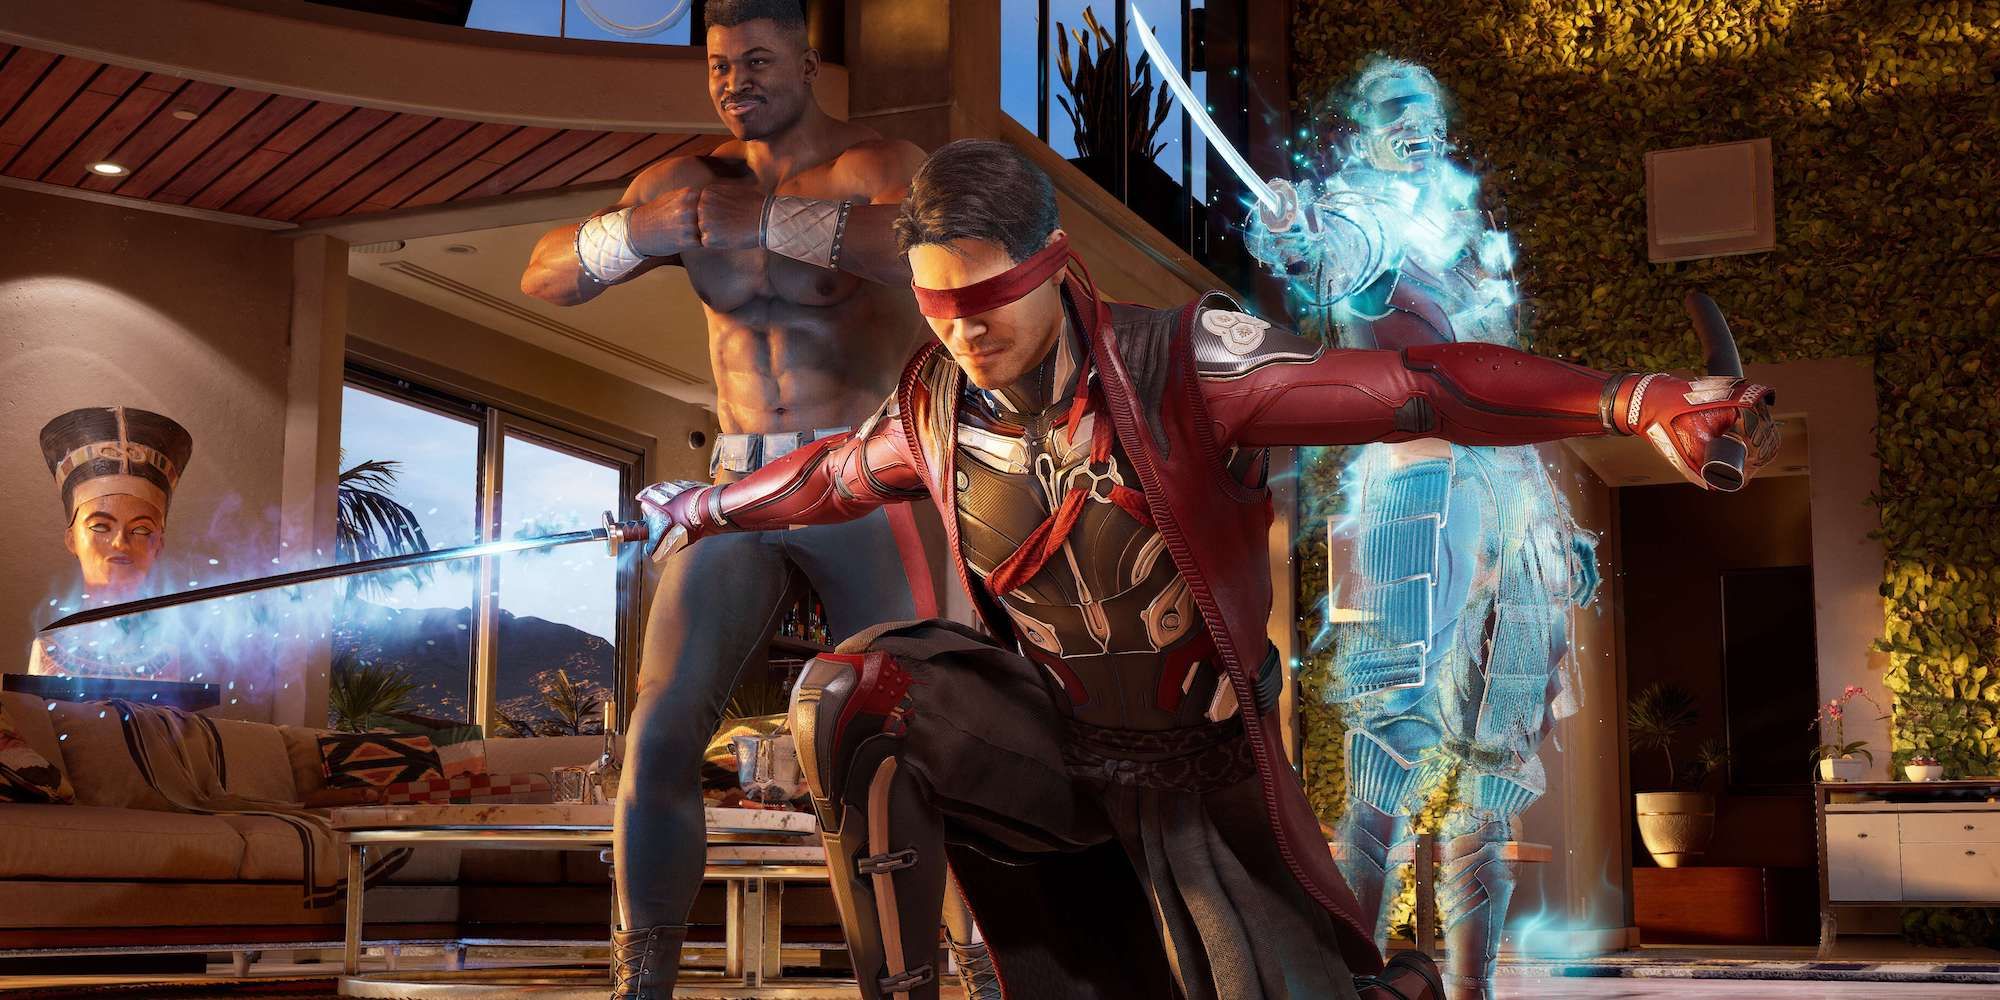 Mortal Kombat 1 Hands-On Preview - We Love What We're Seeing